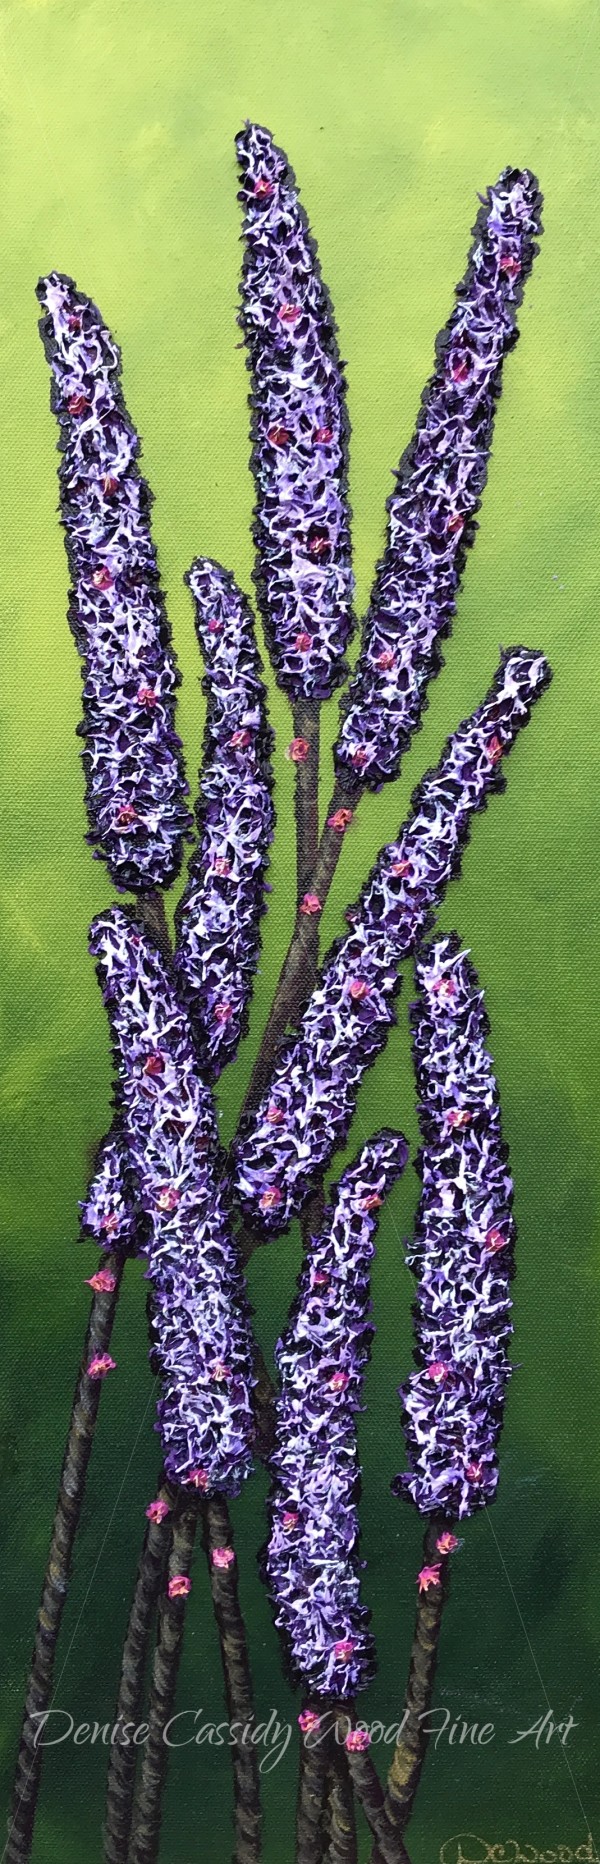 Lavender #655 by Denise Cassidy Wood